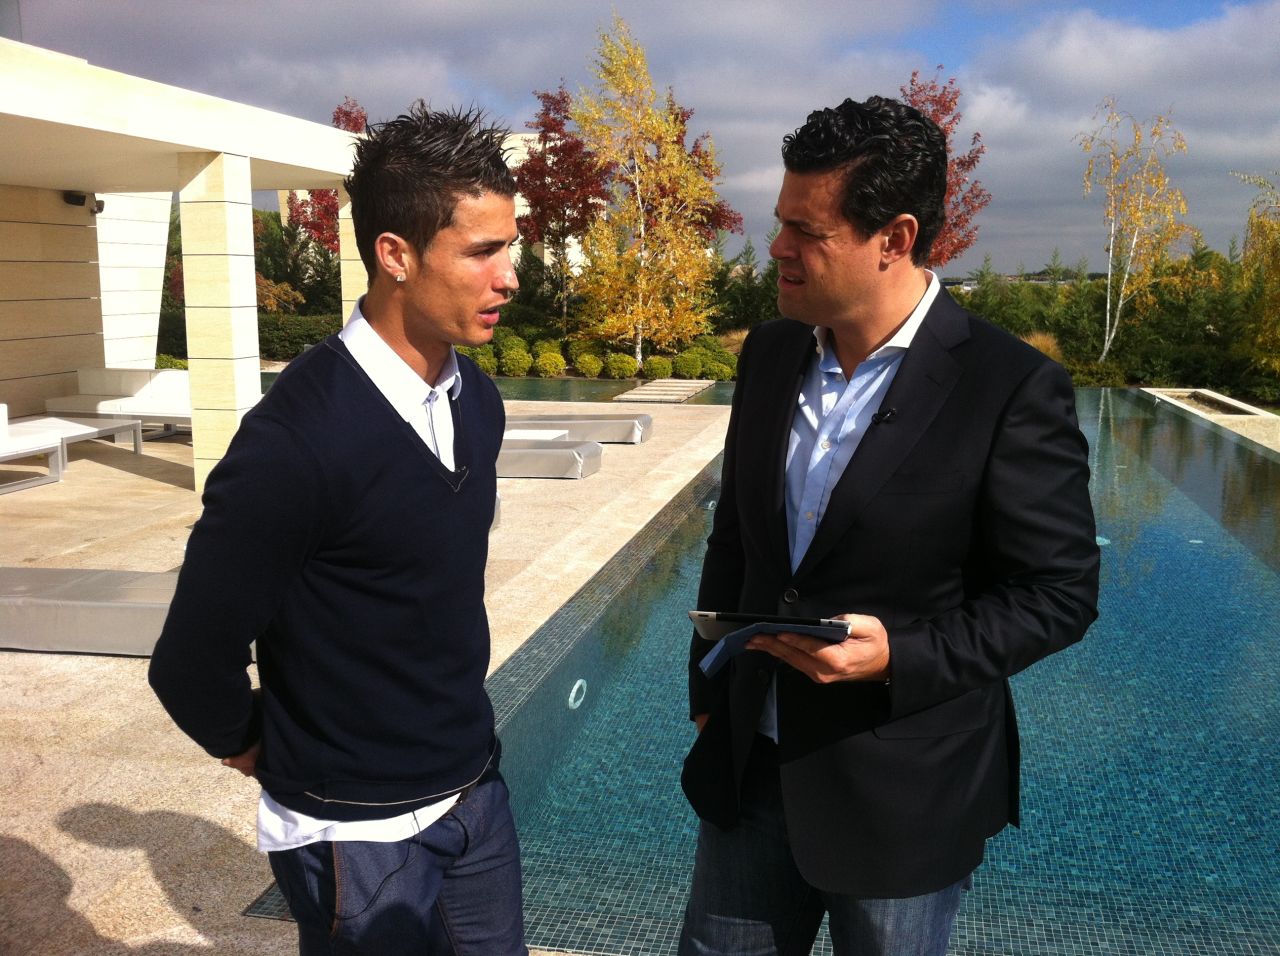 Ronaldo tells CNN's Pedro Pinto in an exclusive interview that he believes his perceived 'arrogance' has made him less popular than his chief rival Lionel Messi. "You know, sometimes I'm a victim of that because they don't know the real Cristiano," said the Real Madrid forward.